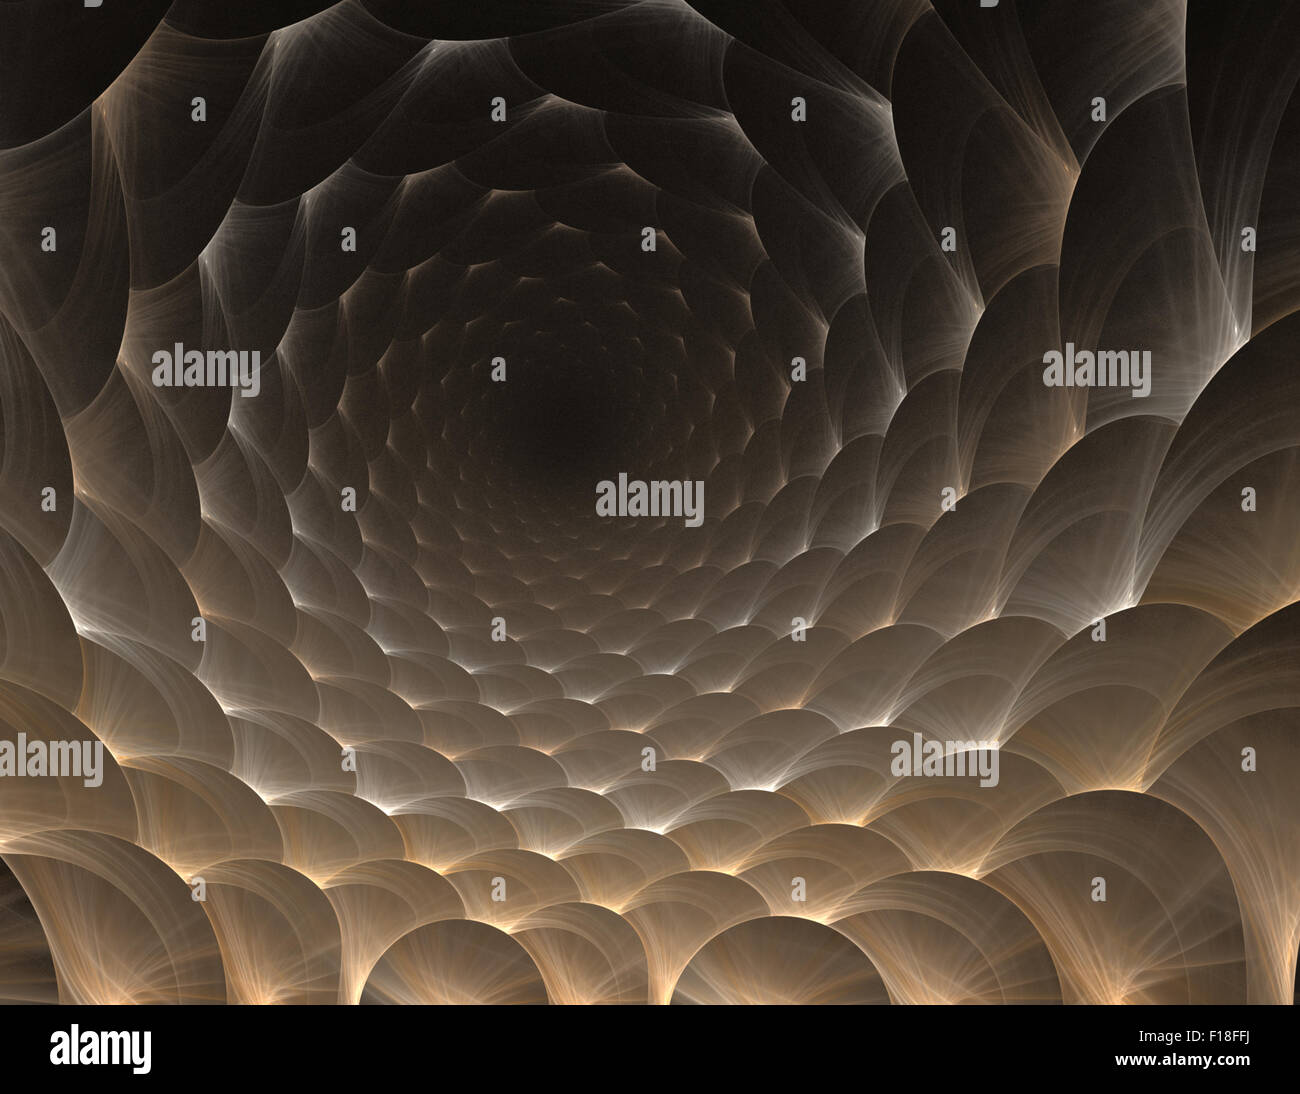 Simple fractal pattern form of round honeycomb perspective Stock Photo